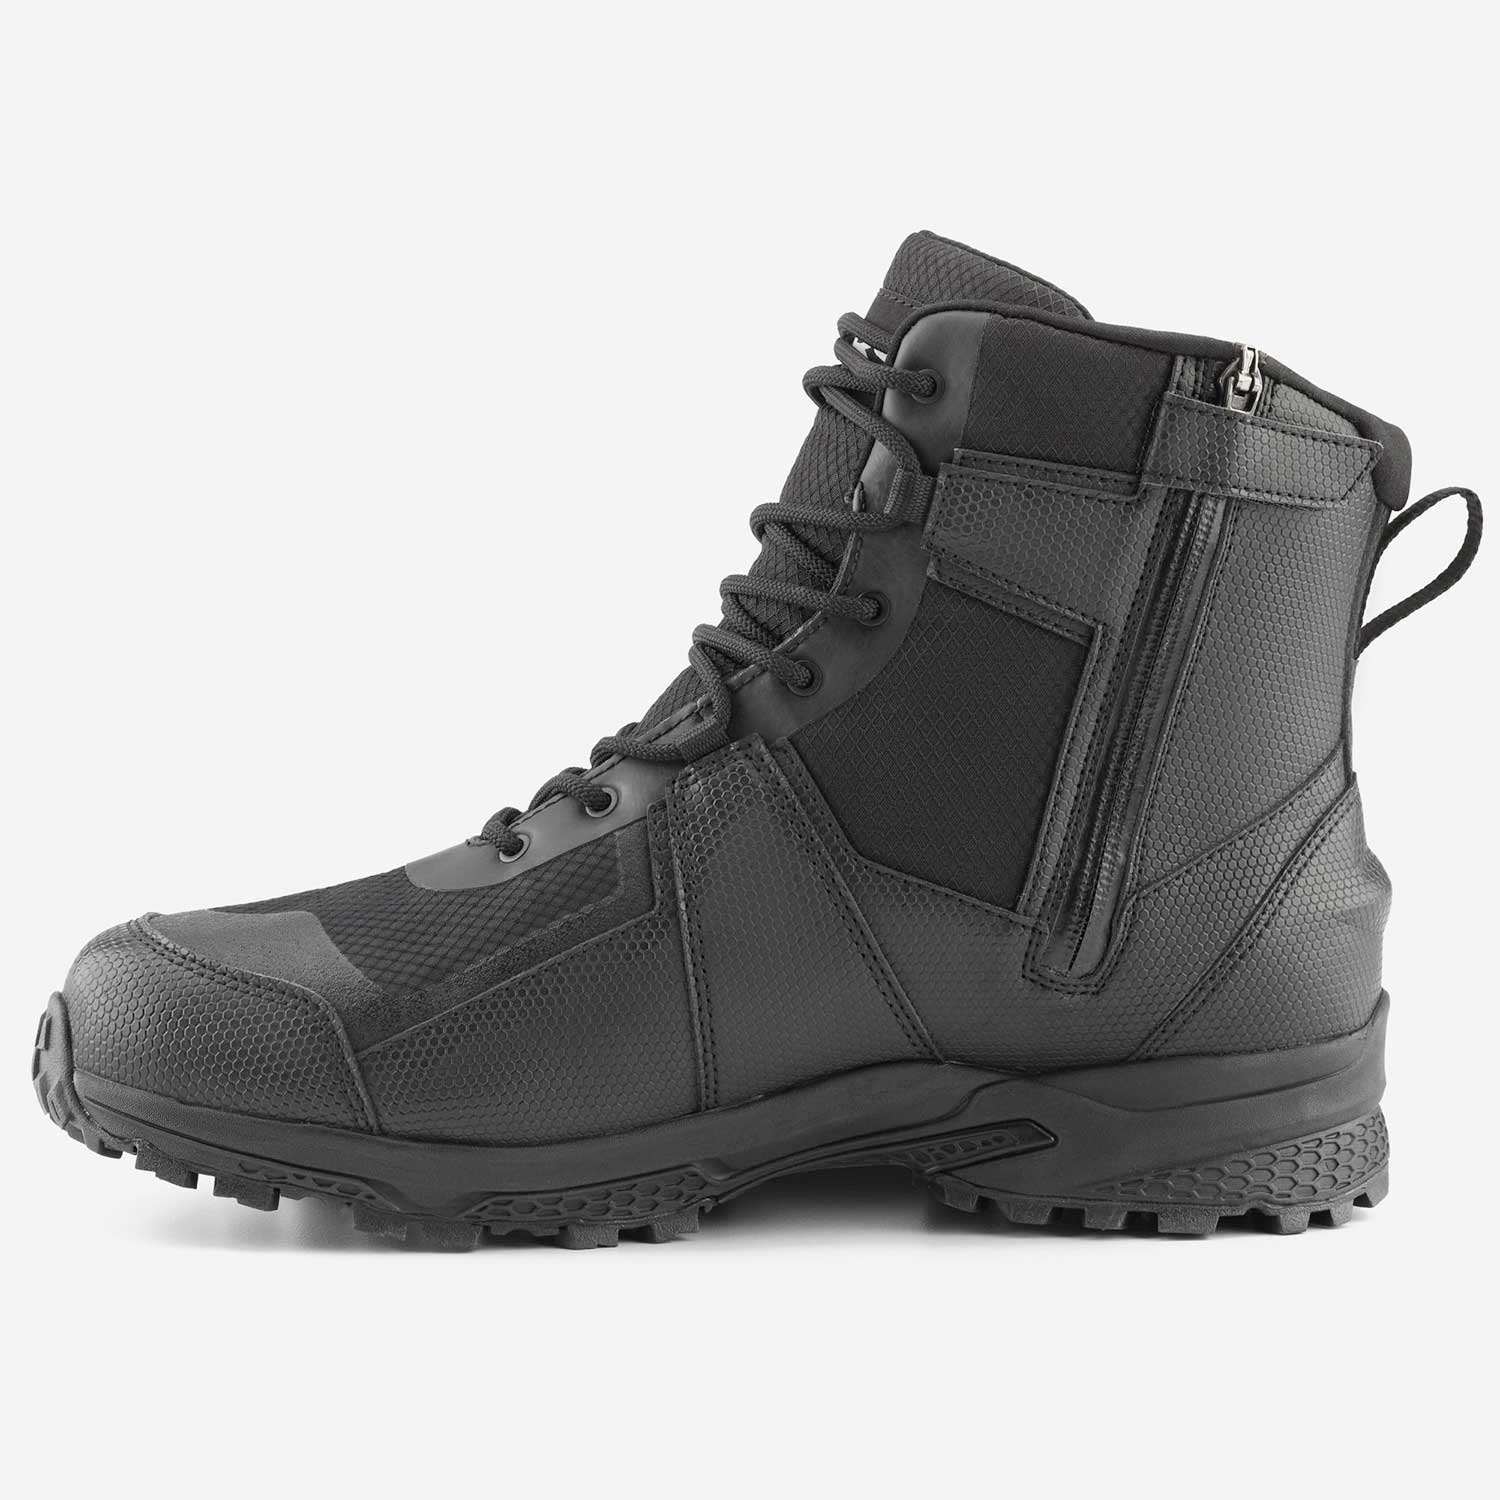 NRS Boundary Boot Review